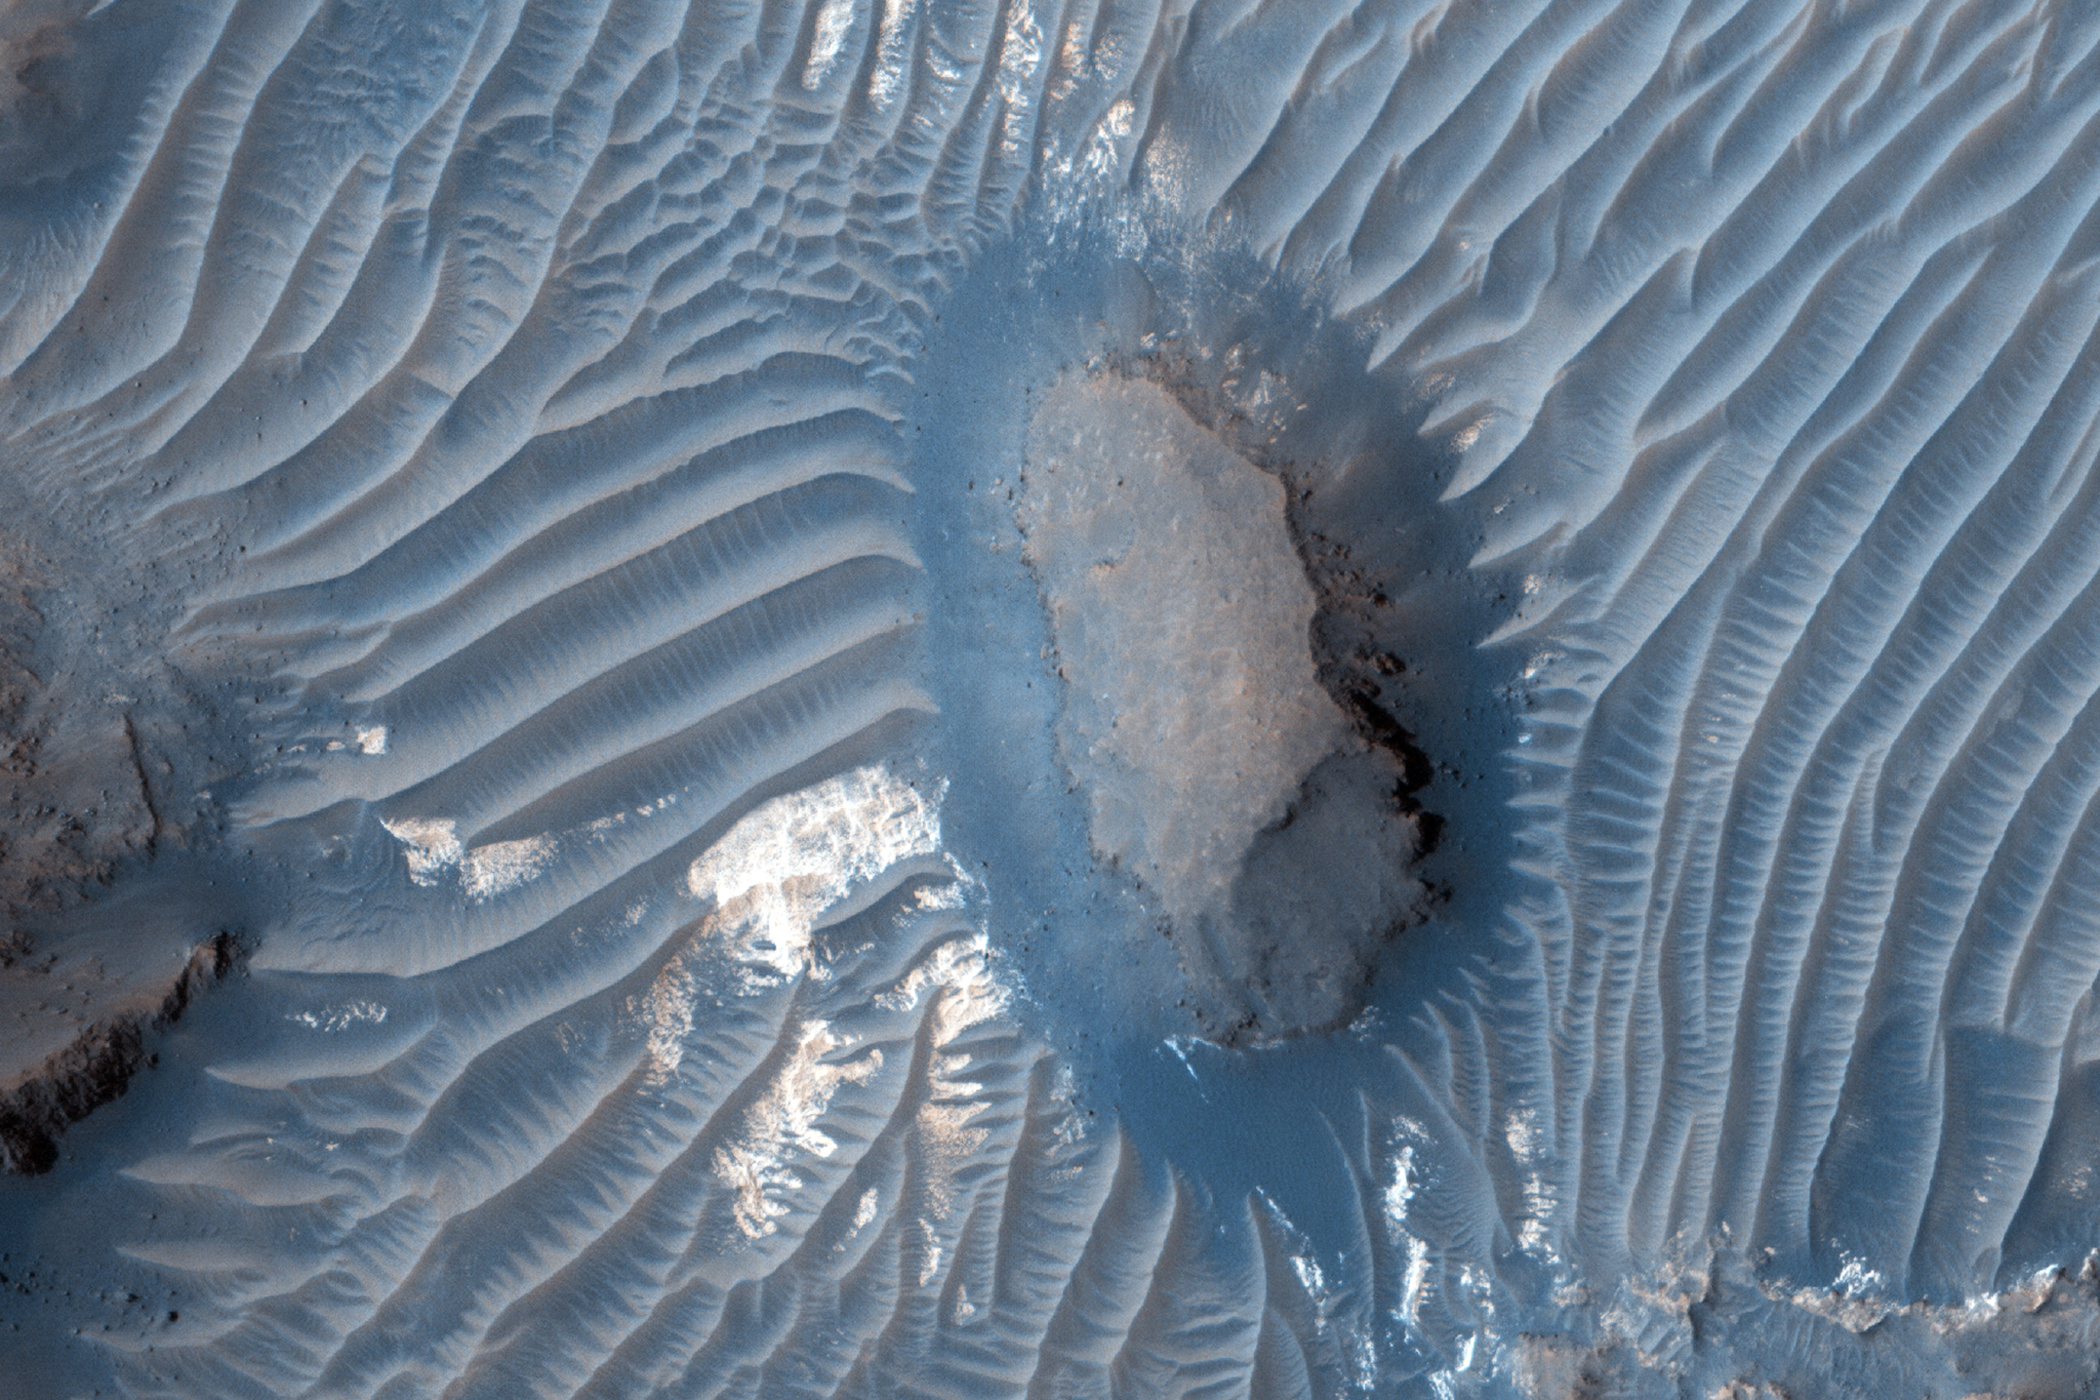 This image is located within Aram Chaos near the outlet to Ares Valles. Aram Chaos is a 1300 kilometer (approximately 800 miles) diameter depression from which enormous cataclysmic releases of ground water are thought to have exploded onto the surface of Mars. The water then flowed northwards across the southern highlands, helping to carve the approximately 2000 kilometer (1200 miles) long Ares Valles outflow channel system.